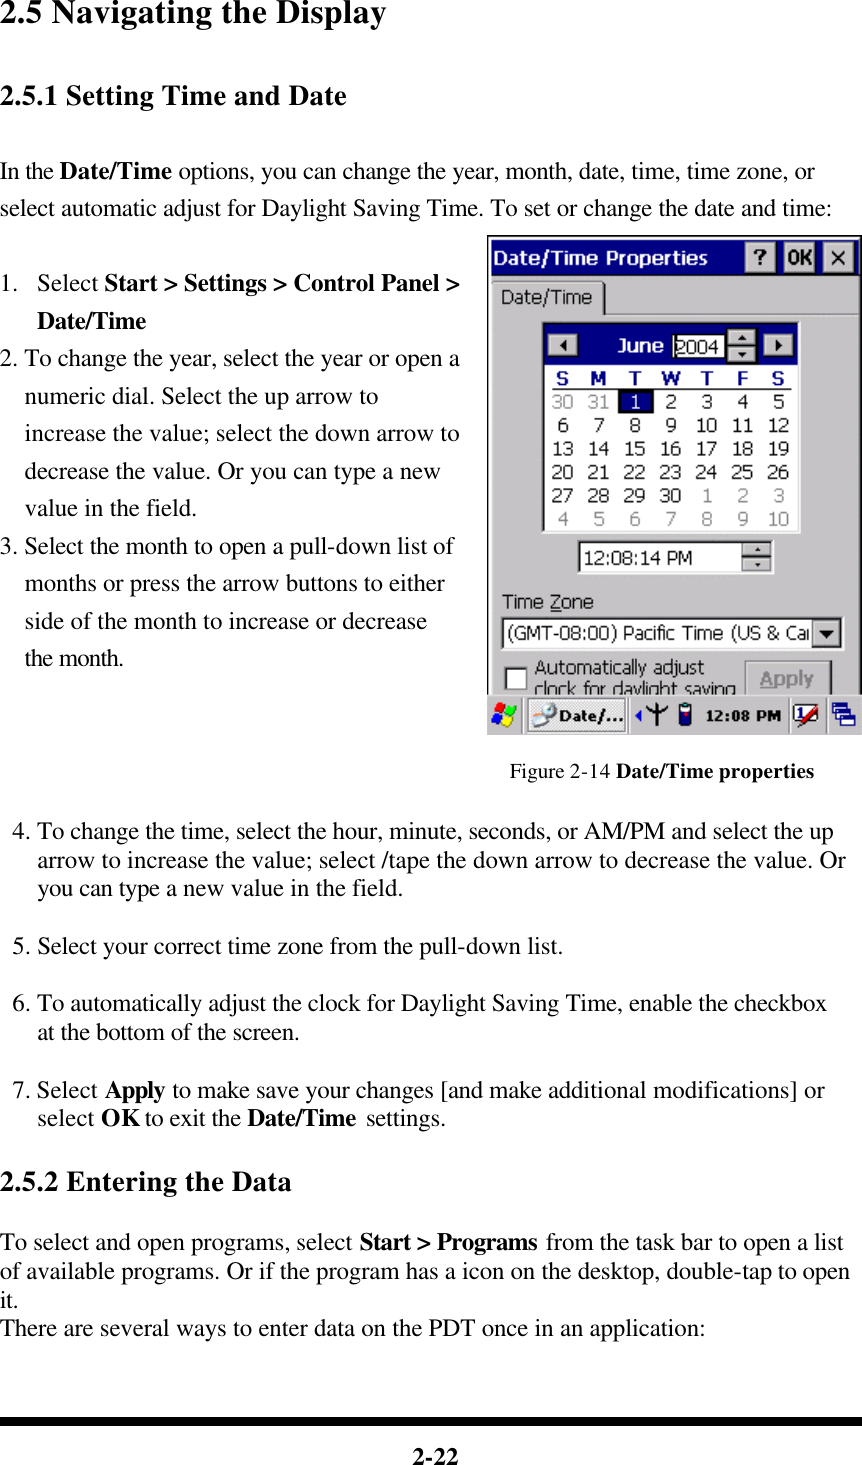  2-22  2.5 Navigating the Display  2.5.1 Setting Time and Date  In the Date/Time options, you can change the year, month, date, time, time zone, or select automatic adjust for Daylight Saving Time. To set or change the date and time:  1.  Select Start &gt; Settings &gt; Control Panel &gt; Date/Time 2. To change the year, select the year or open a numeric dial. Select the up arrow to increase the value; select the down arrow to decrease the value. Or you can type a new value in the field. 3. Select the month to open a pull-down list of months or press the arrow buttons to either side of the month to increase or decrease the month.   Figure 2-14 Date/Time properties   4. To change the time, select the hour, minute, seconds, or AM/PM and select the up arrow to increase the value; select /tape the down arrow to decrease the value. Or you can type a new value in the field.   5. Select your correct time zone from the pull-down list.   6. To automatically adjust the clock for Daylight Saving Time, enable the checkbox at the bottom of the screen.   7. Select Apply to make save your changes [and make additional modifications] or select OK to exit the Date/Time settings.  2.5.2 Entering the Data  To select and open programs, select Start &gt; Programs from the task bar to open a list of available programs. Or if the program has a icon on the desktop, double-tap to open it. There are several ways to enter data on the PDT once in an application:  